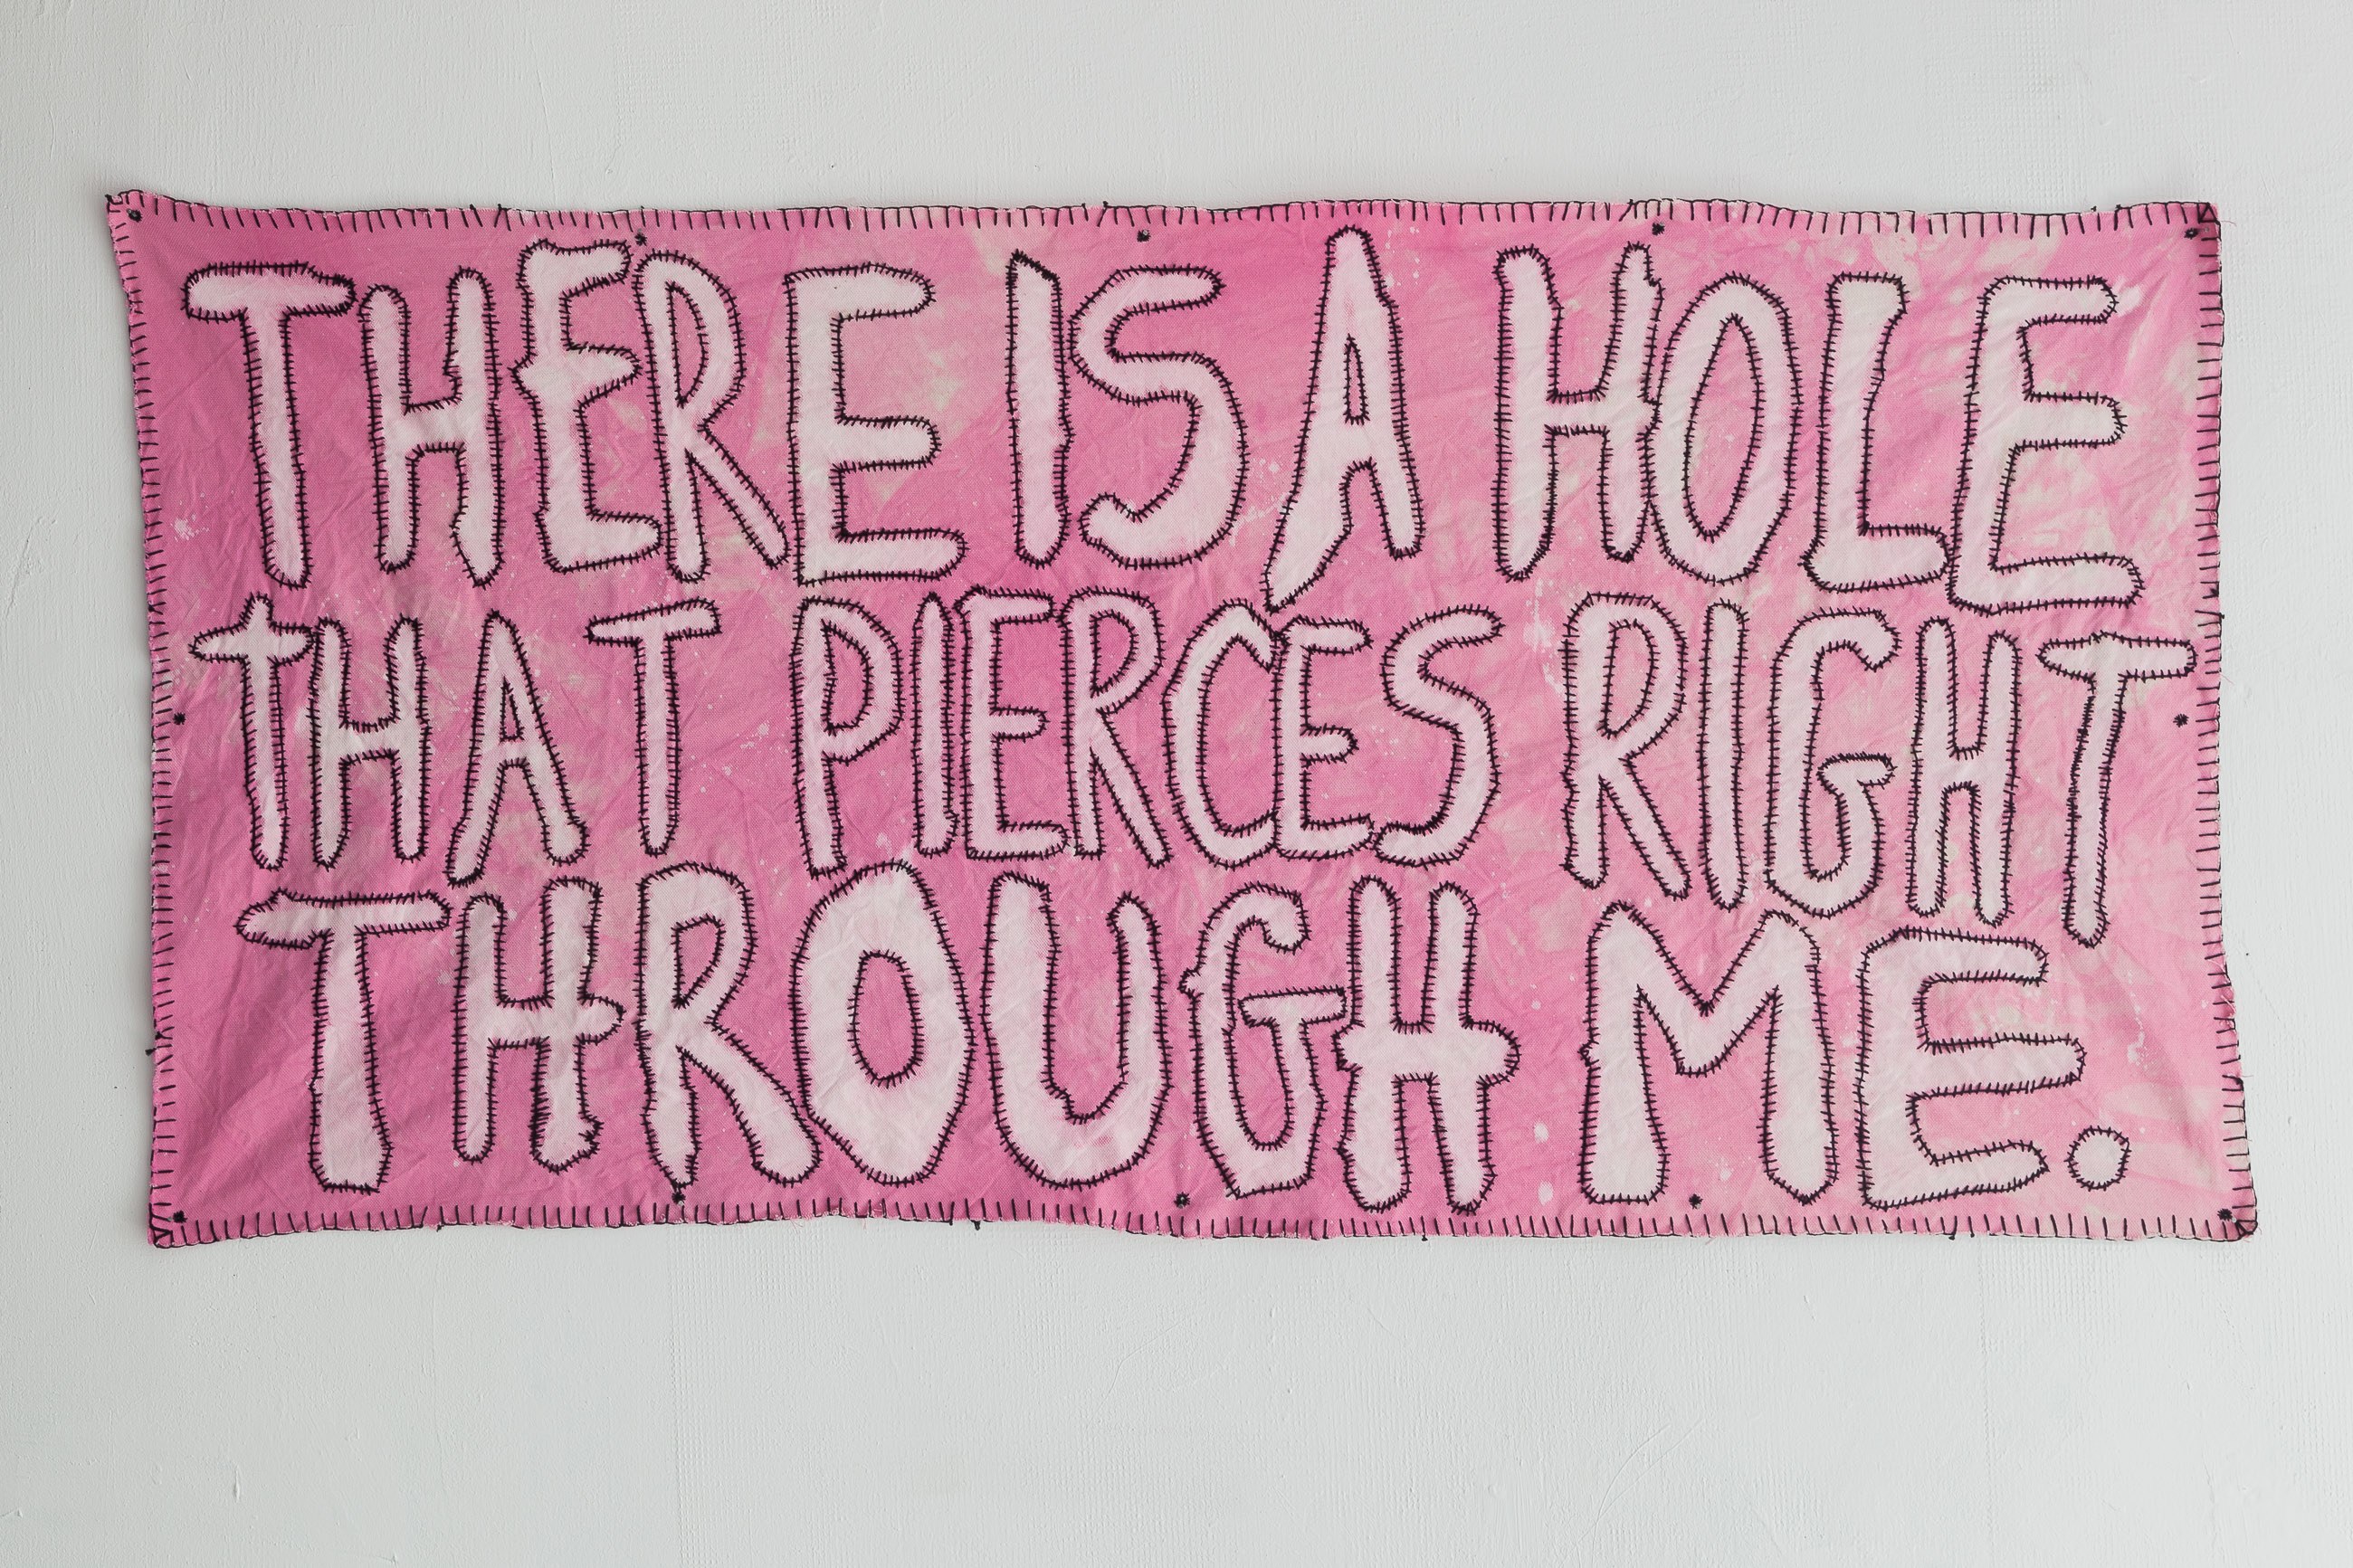 18 NicolÃ¡s Astorga, THERE IS A HOLE THAT PIERCES RIGHT THROUGH ME, embroidery and bleach on hand dyed cotton, Â  75 x 155 cm, 2021